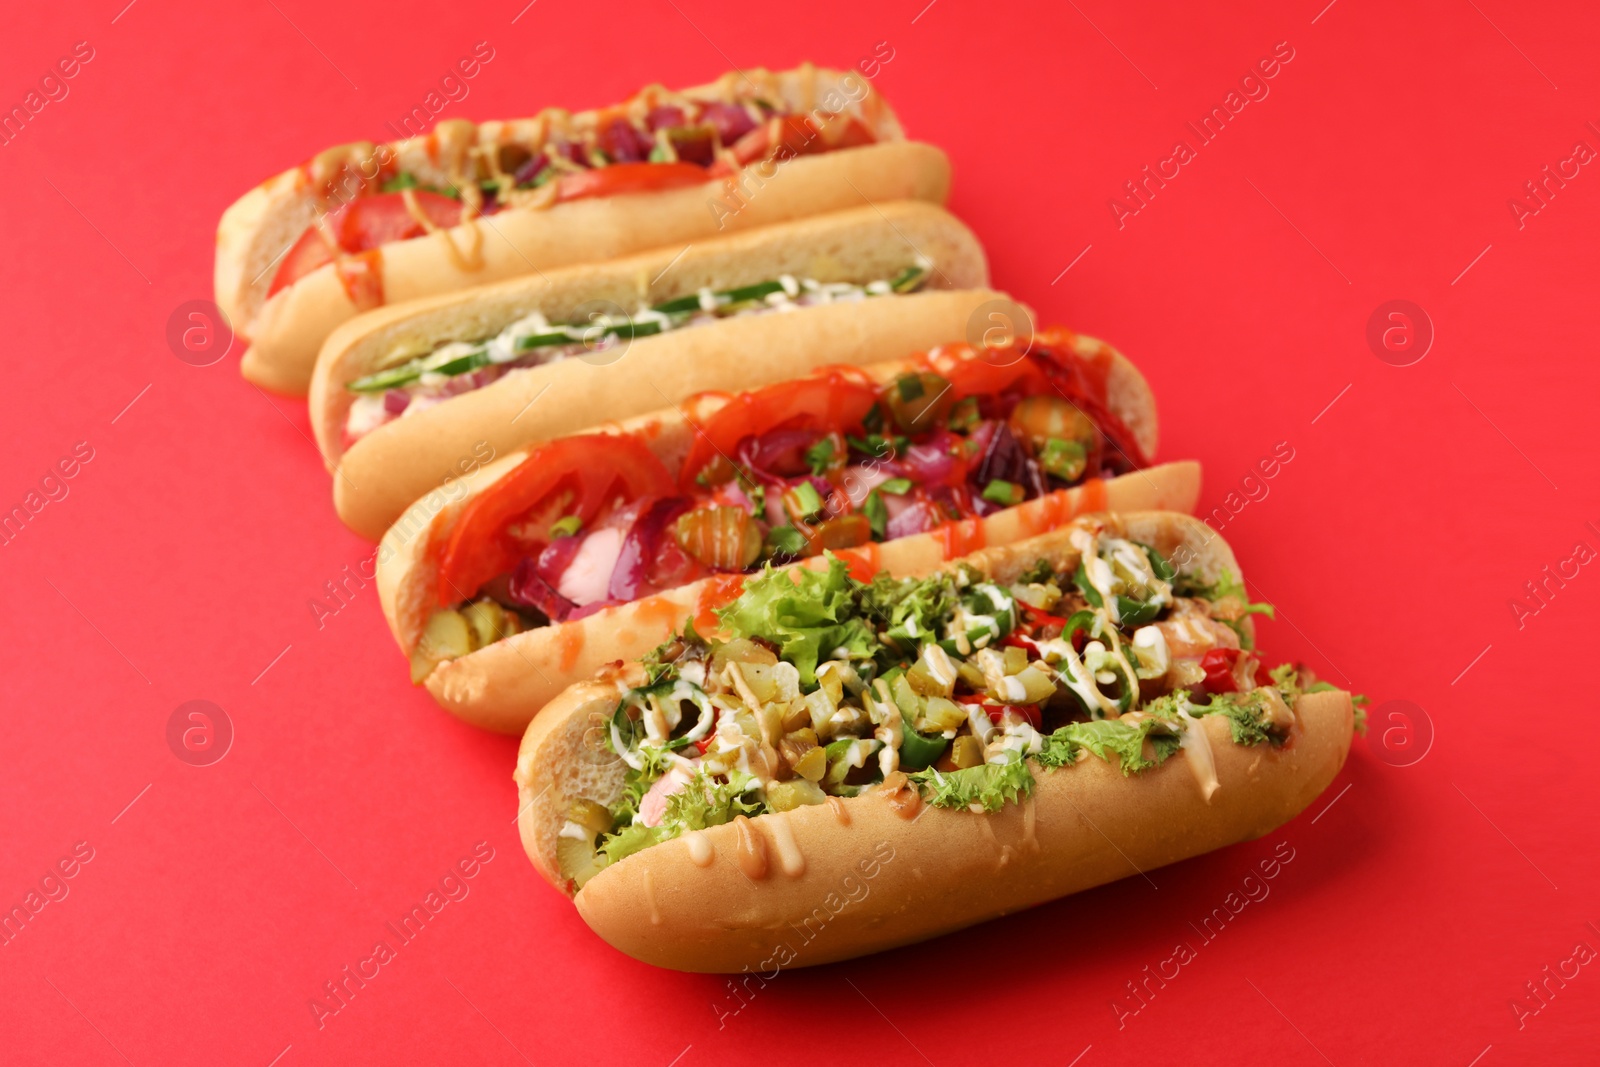 Photo of Delicious hot dogs with different toppings on red background